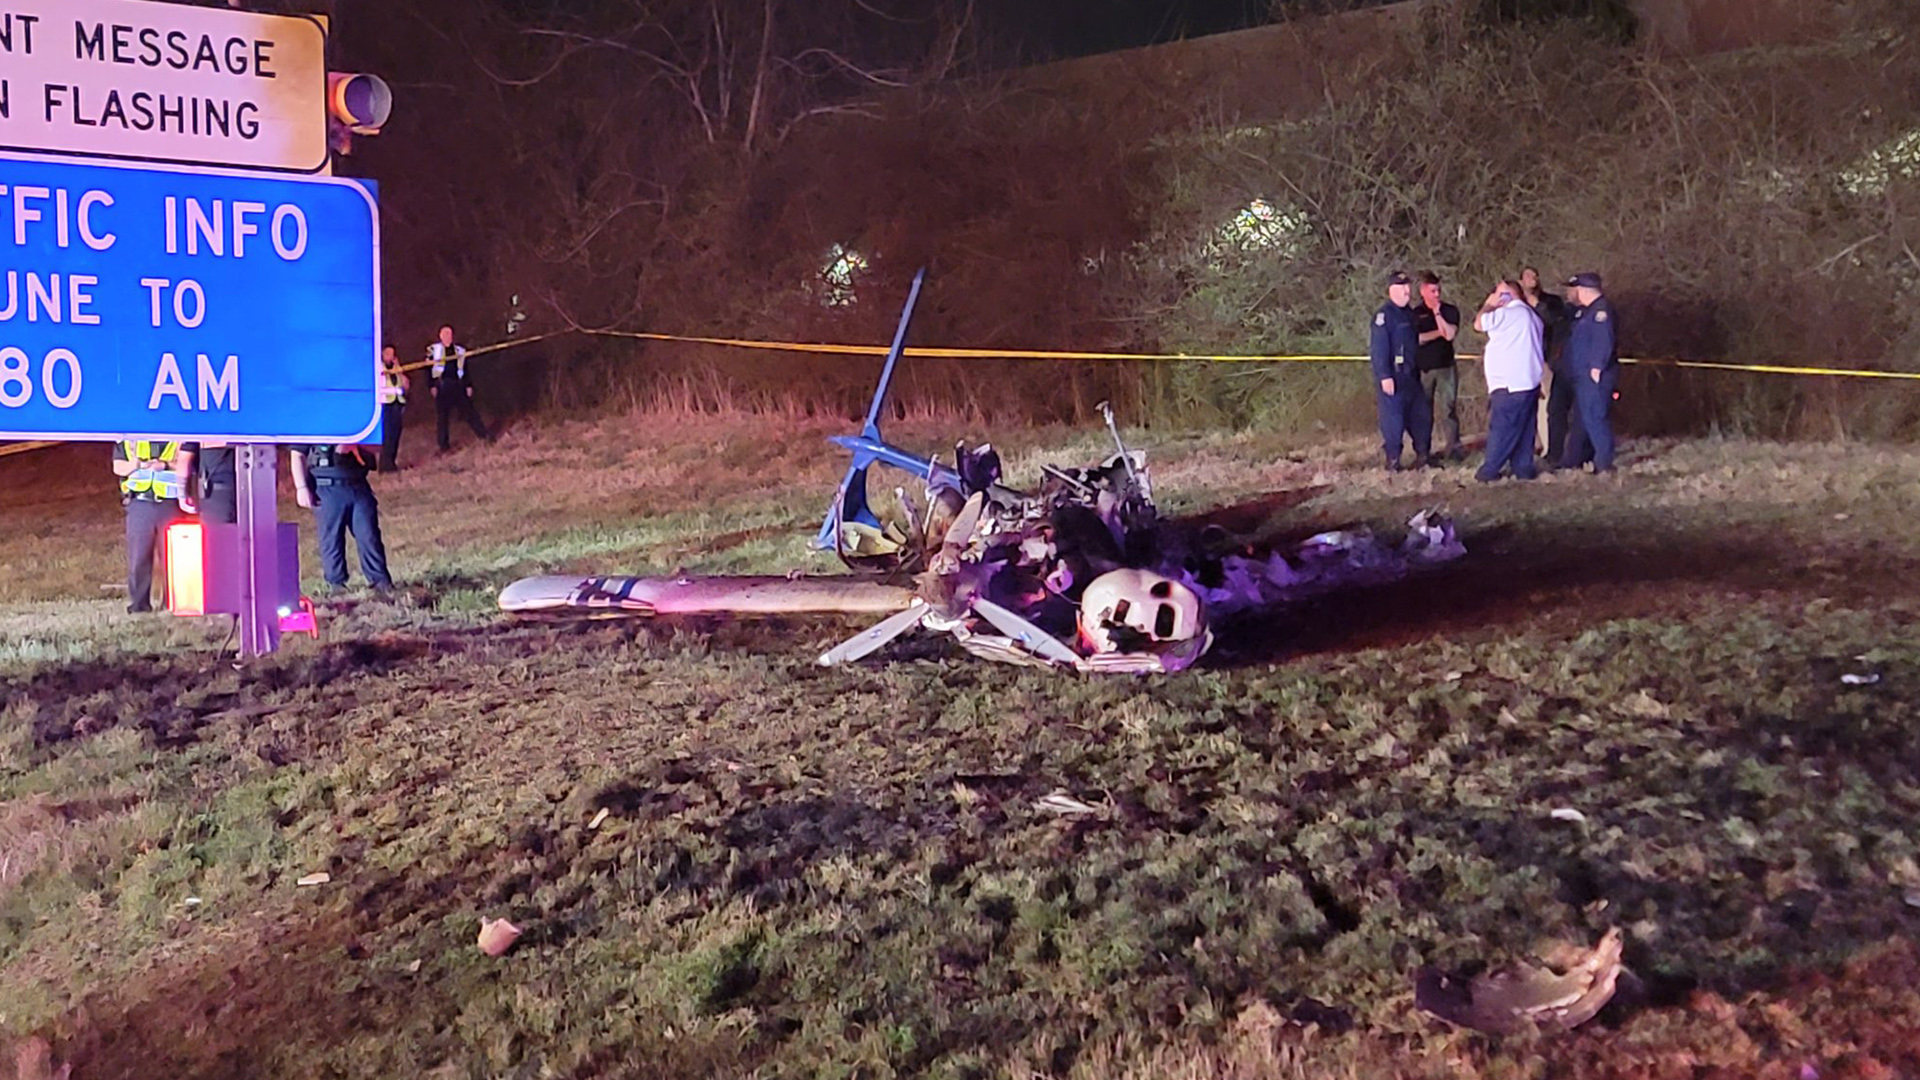 Fatal Nashville Highway Plane Crash: Pilot’s Chilling Final Words Lead to Catastrophic Tragedy, Resulting in at Least 5 Deaths